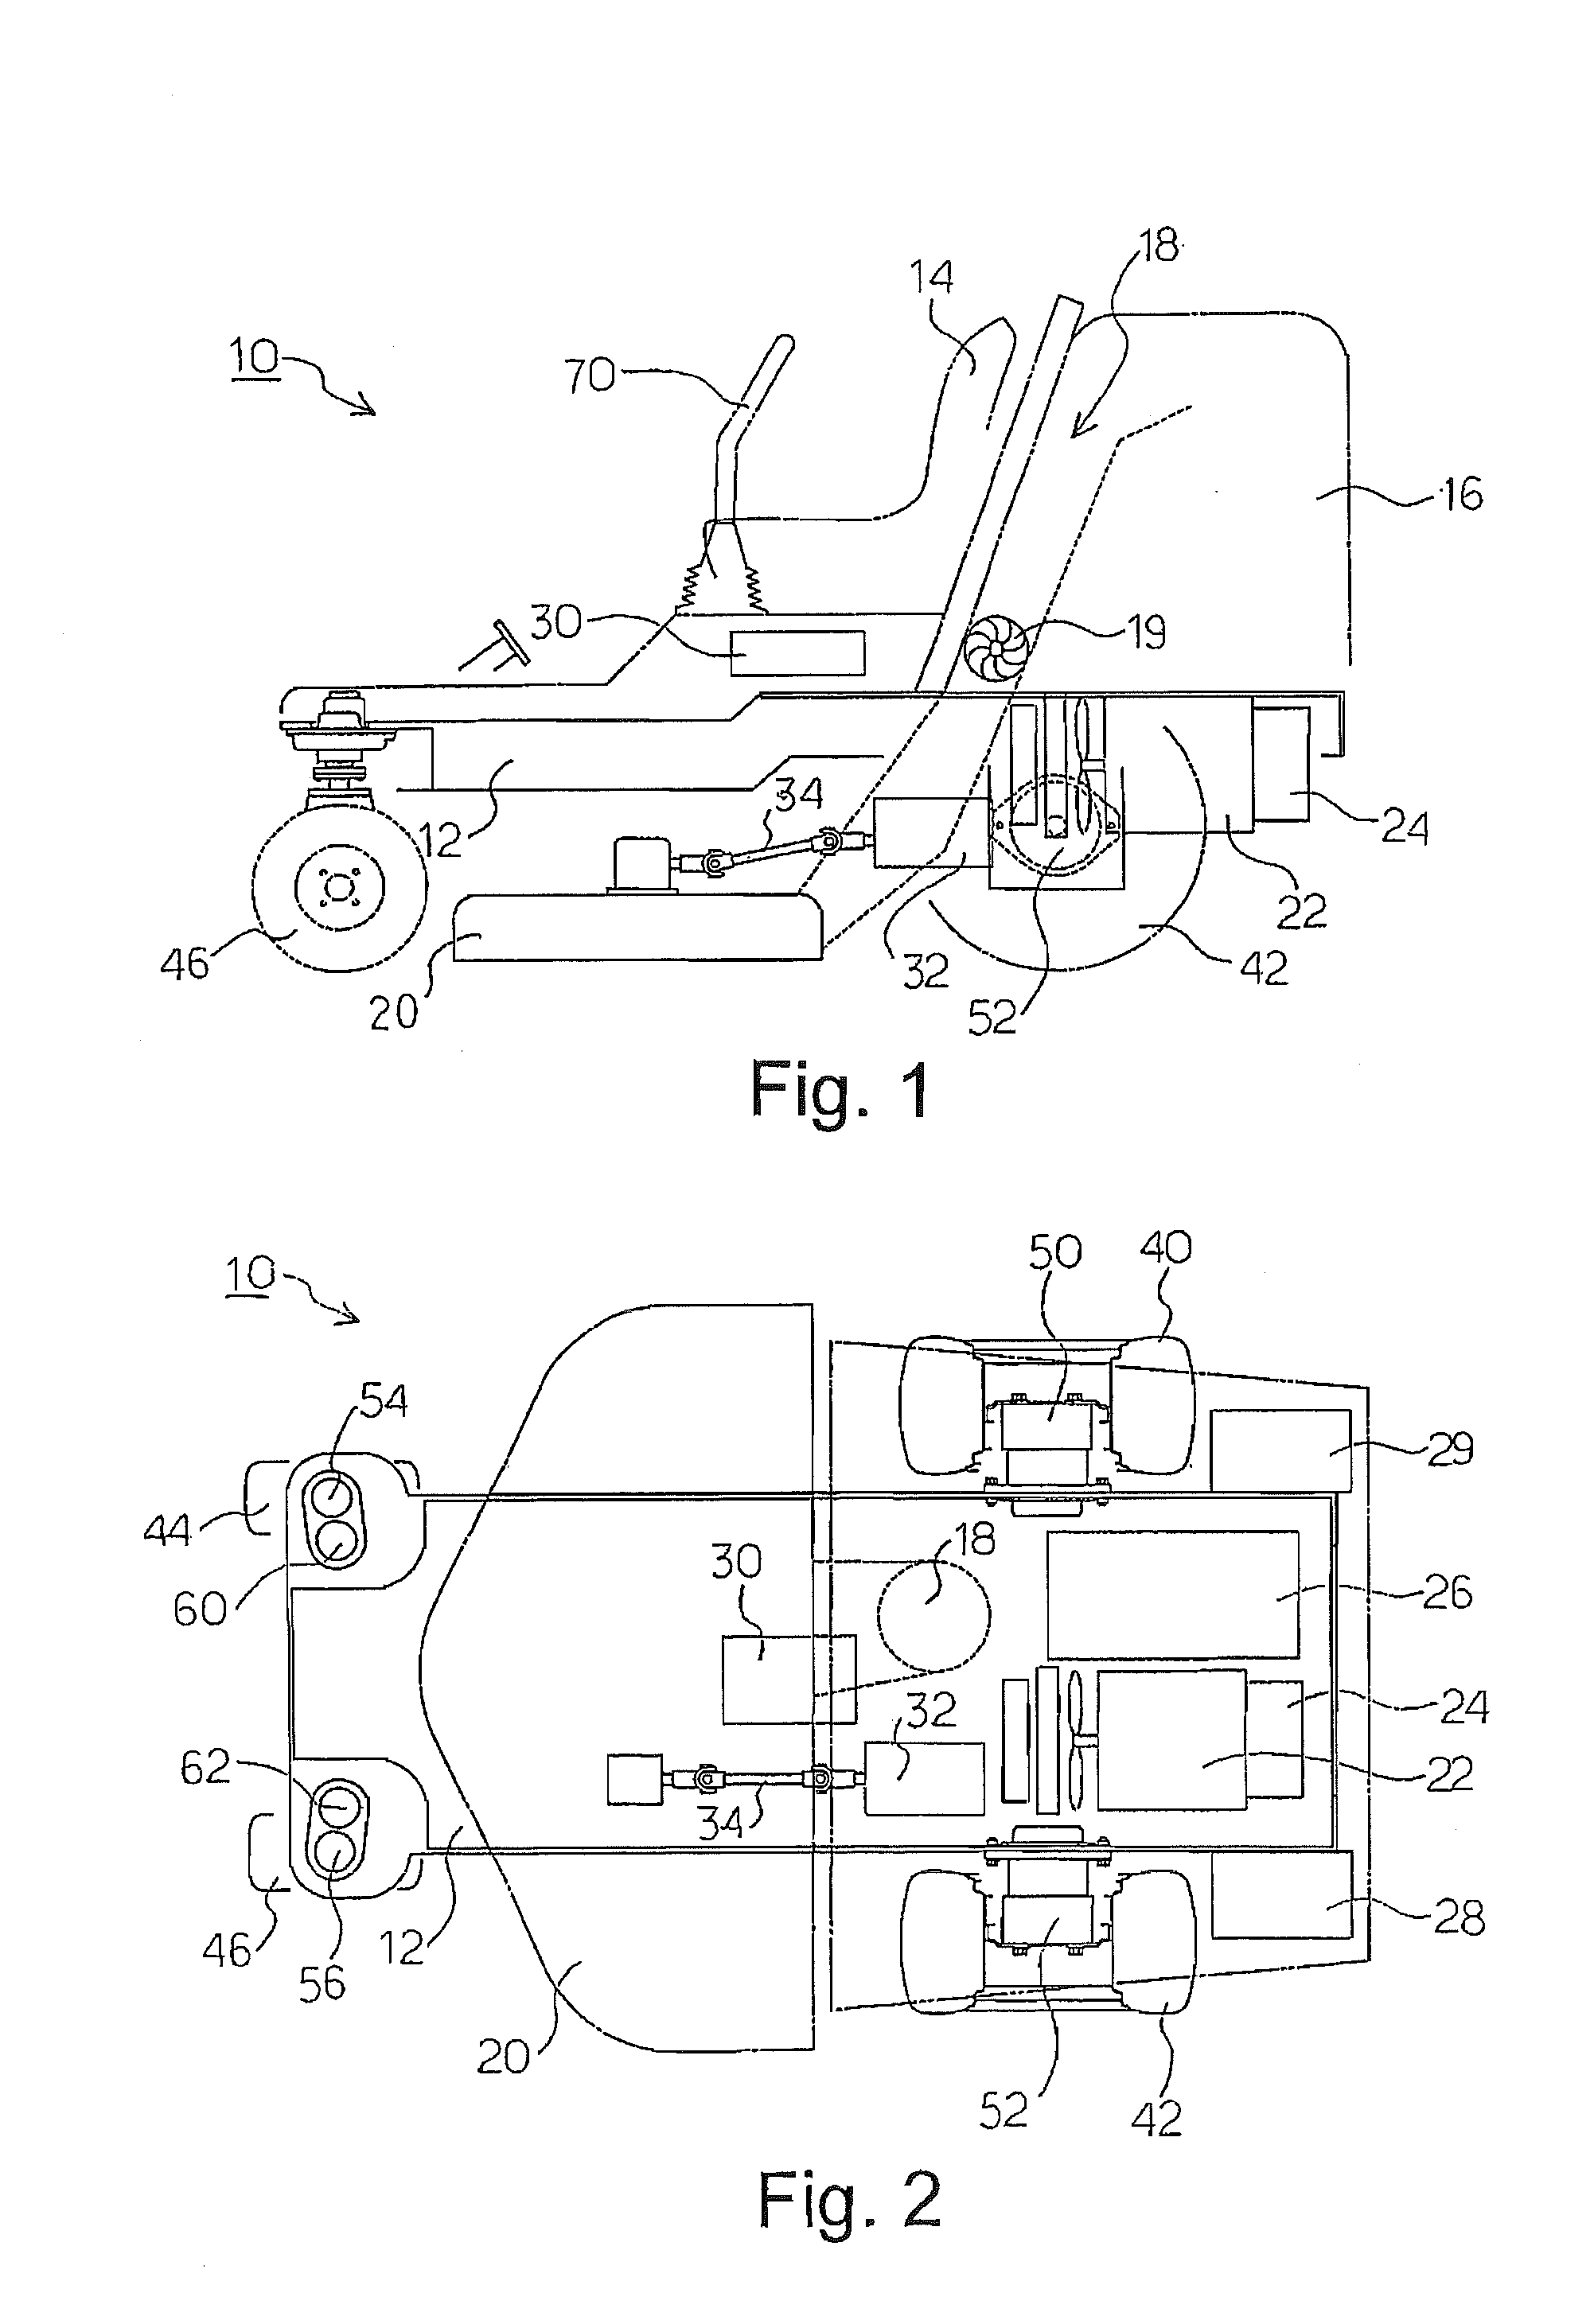 Control sysytem for motor-driven lawnmower vehicle